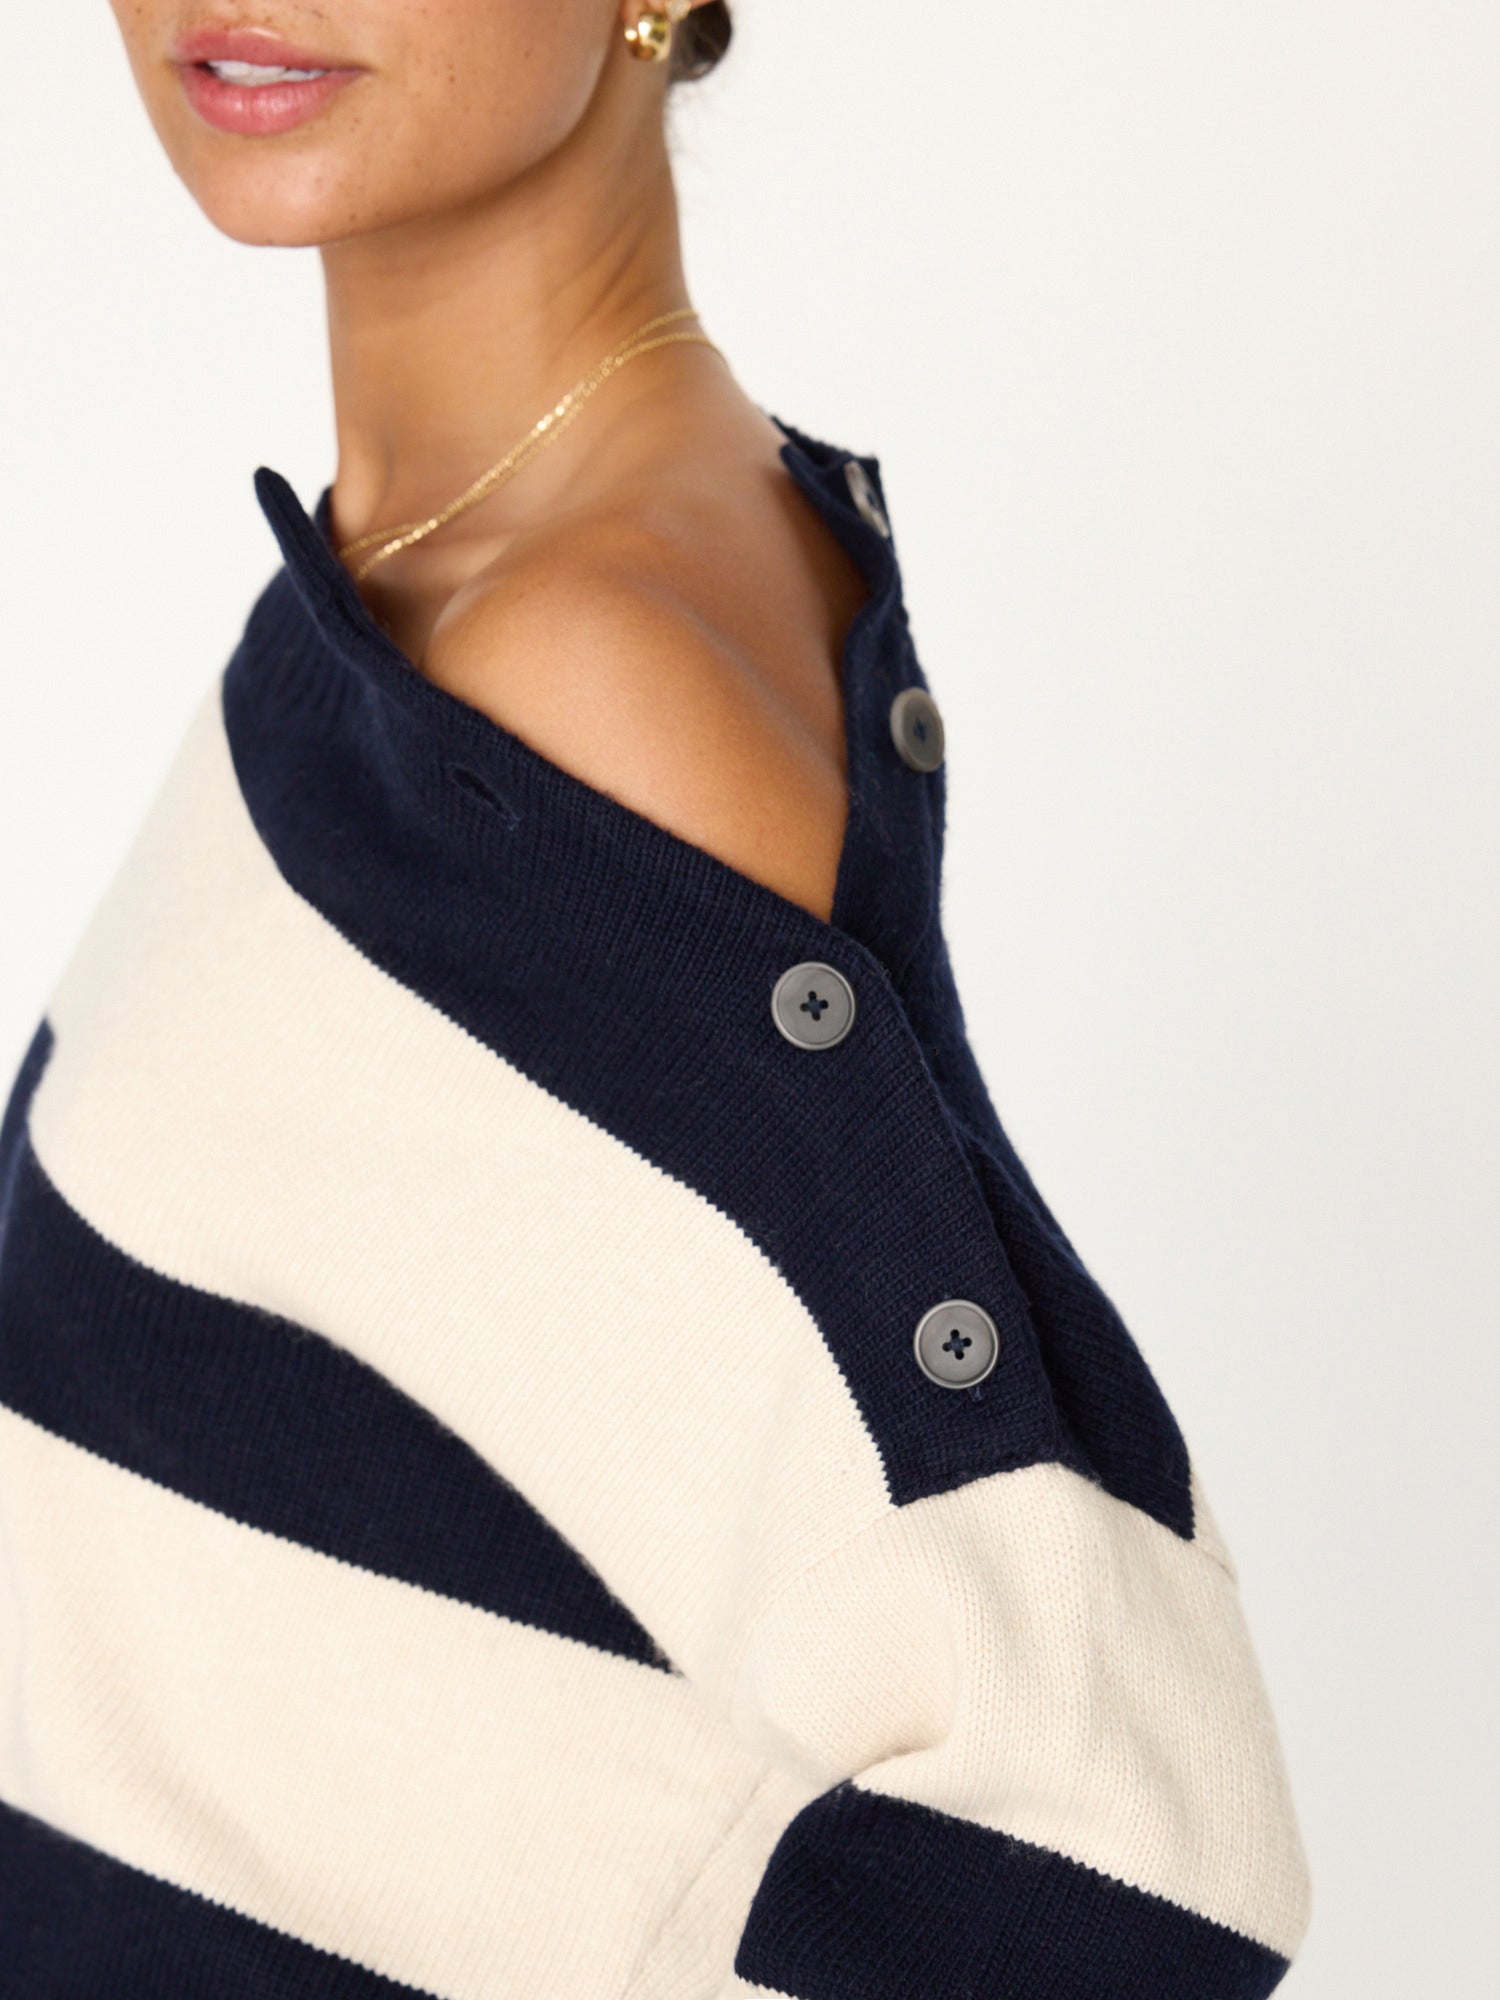 Cy navy and beige stripe crewneck sweater close up